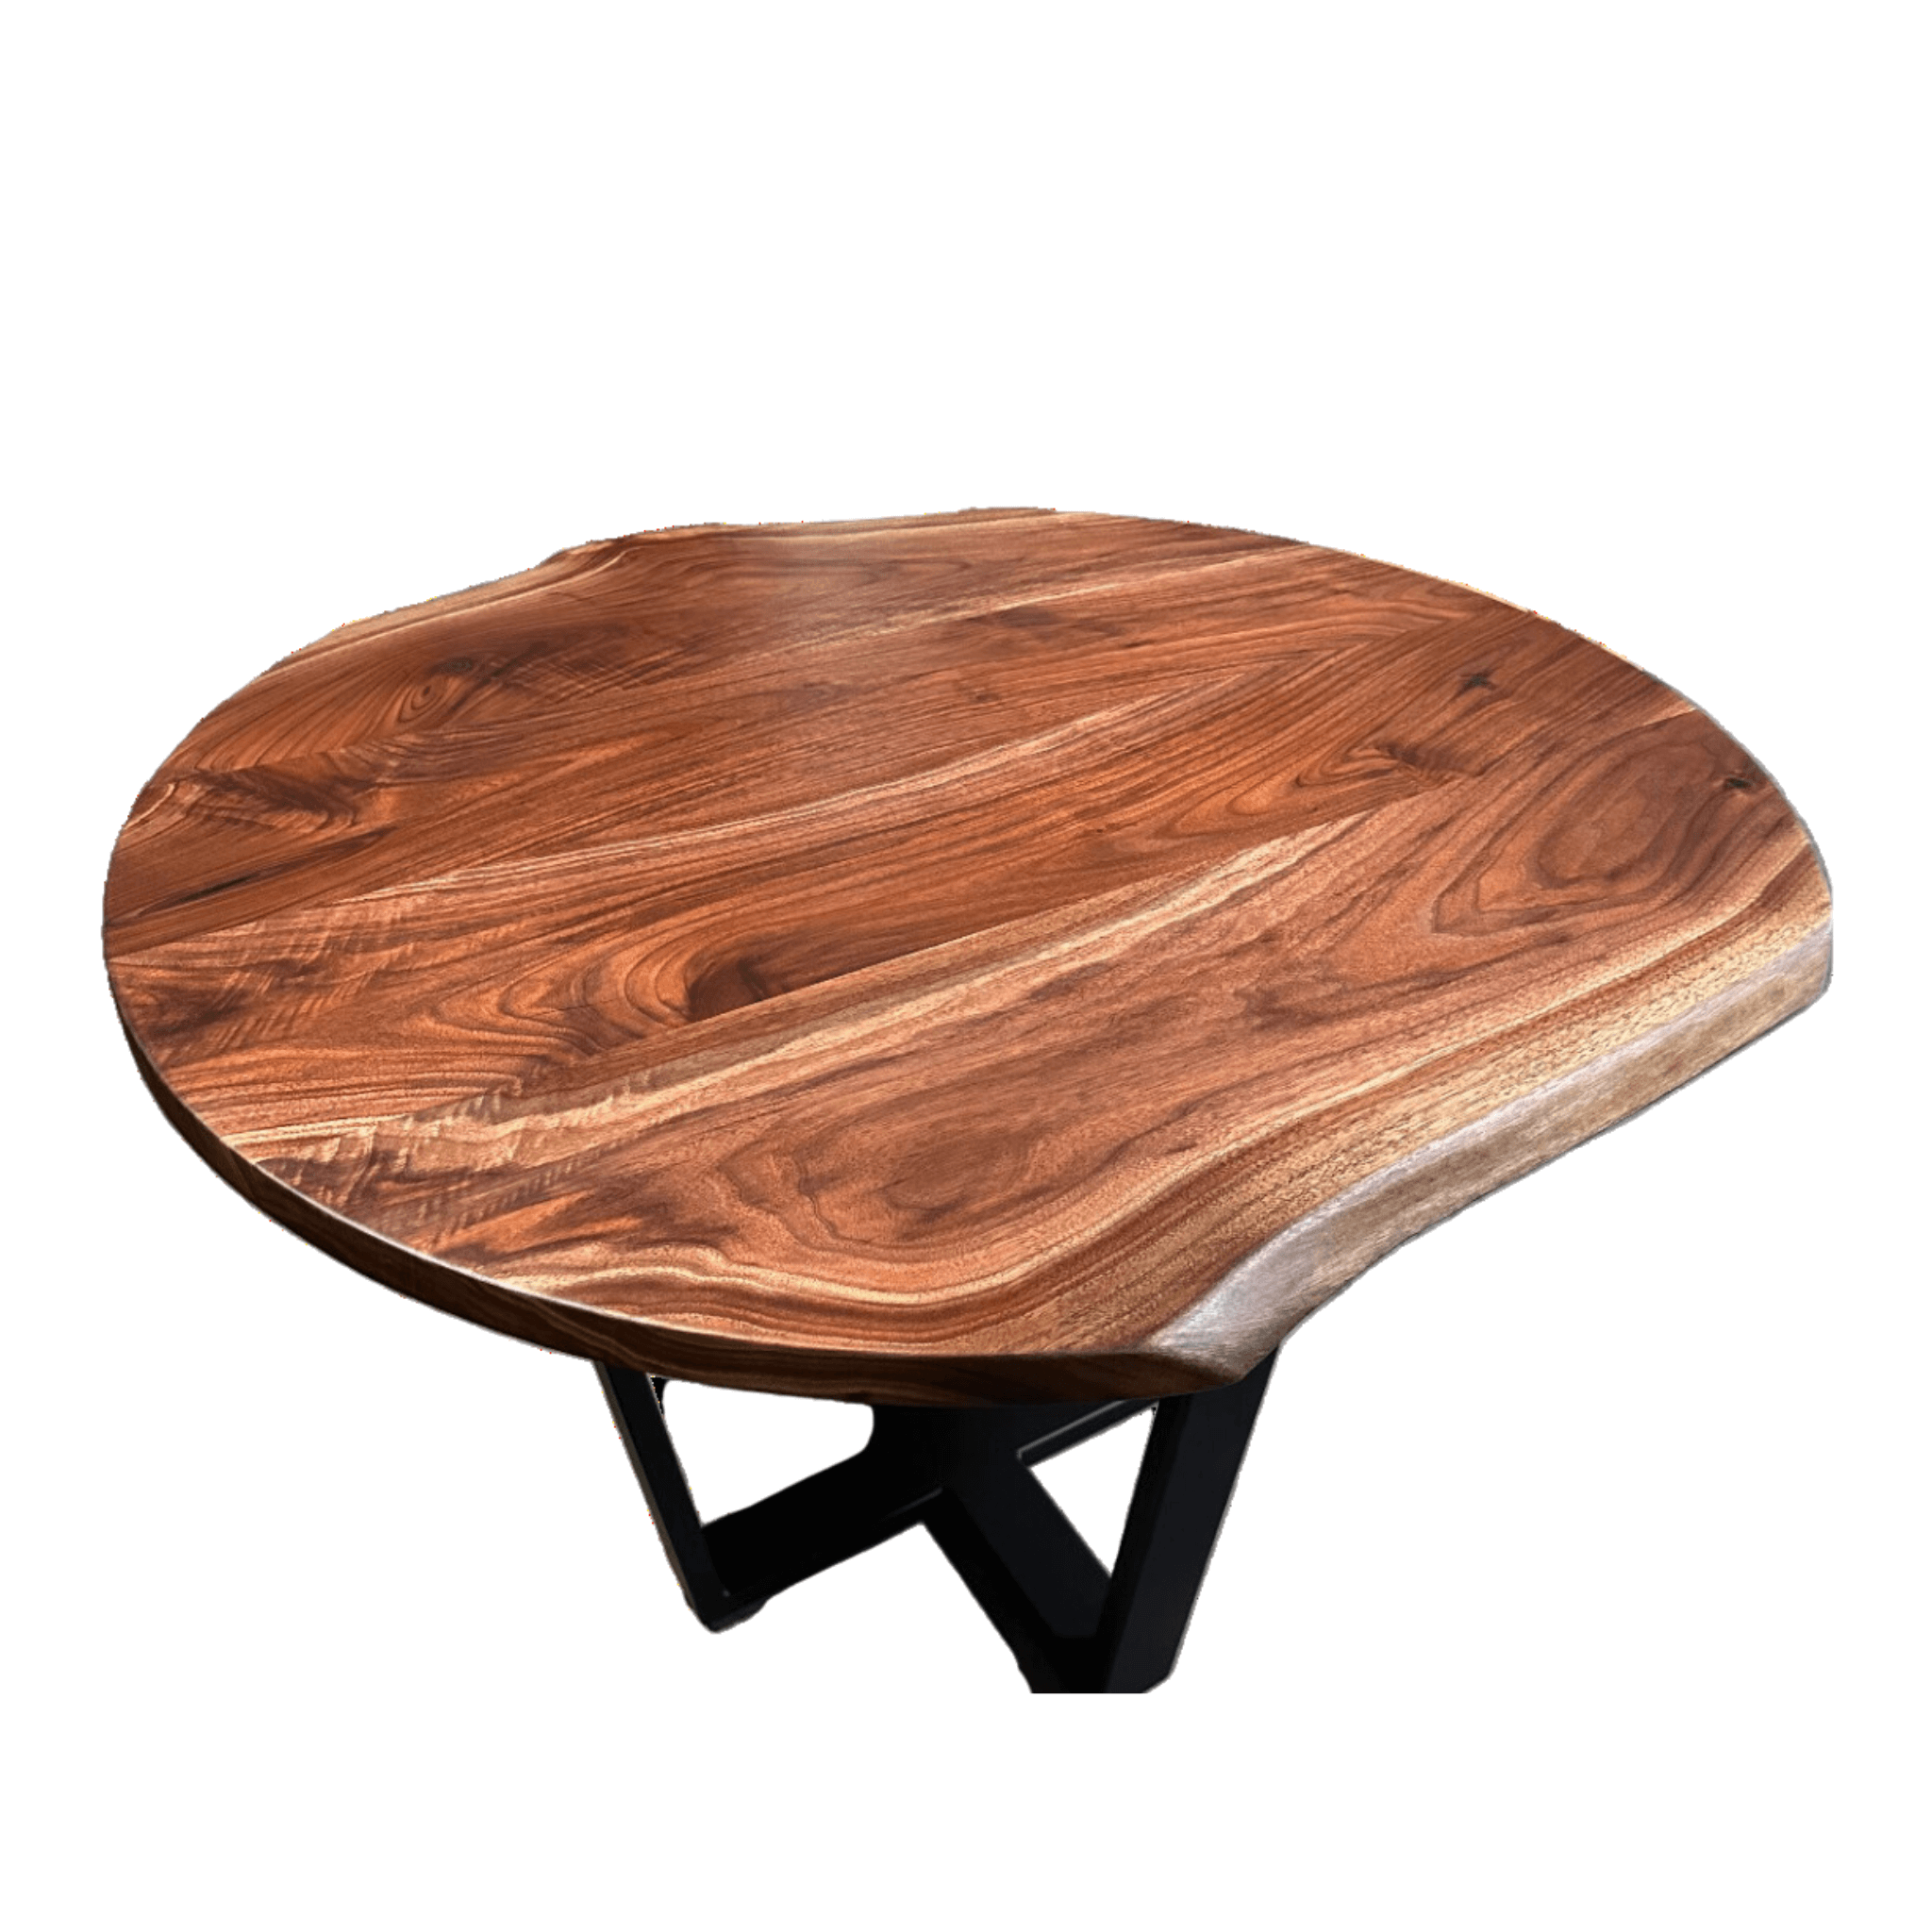 Live edge walnut round dining table. Created by Urban Industrial Design.